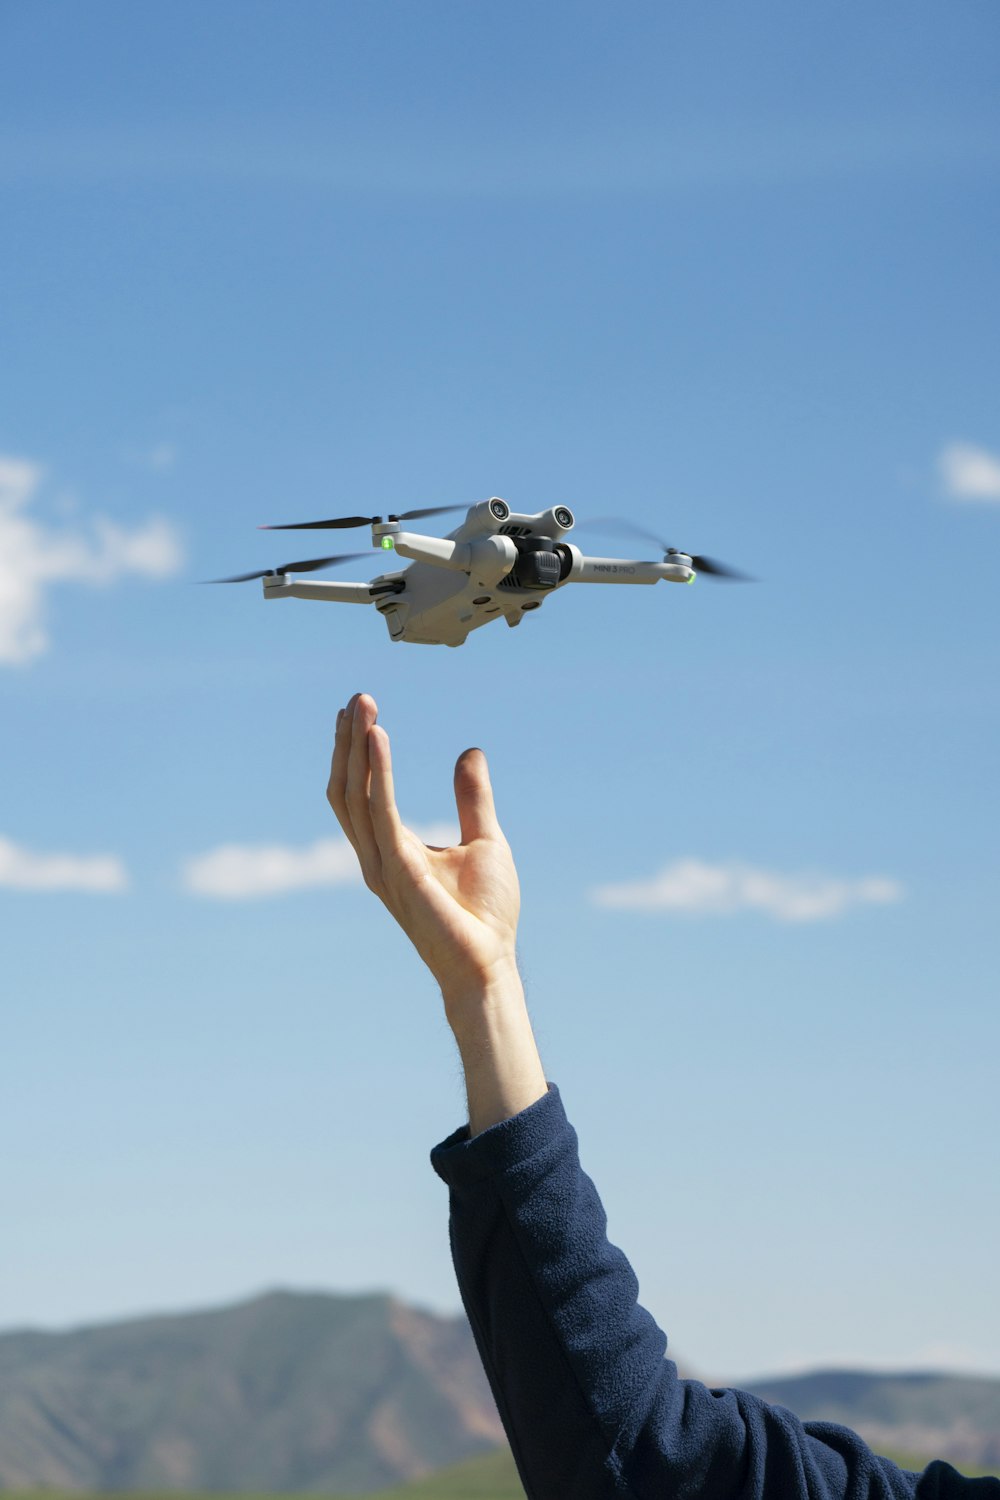 a person holding a remote control plane in their hand